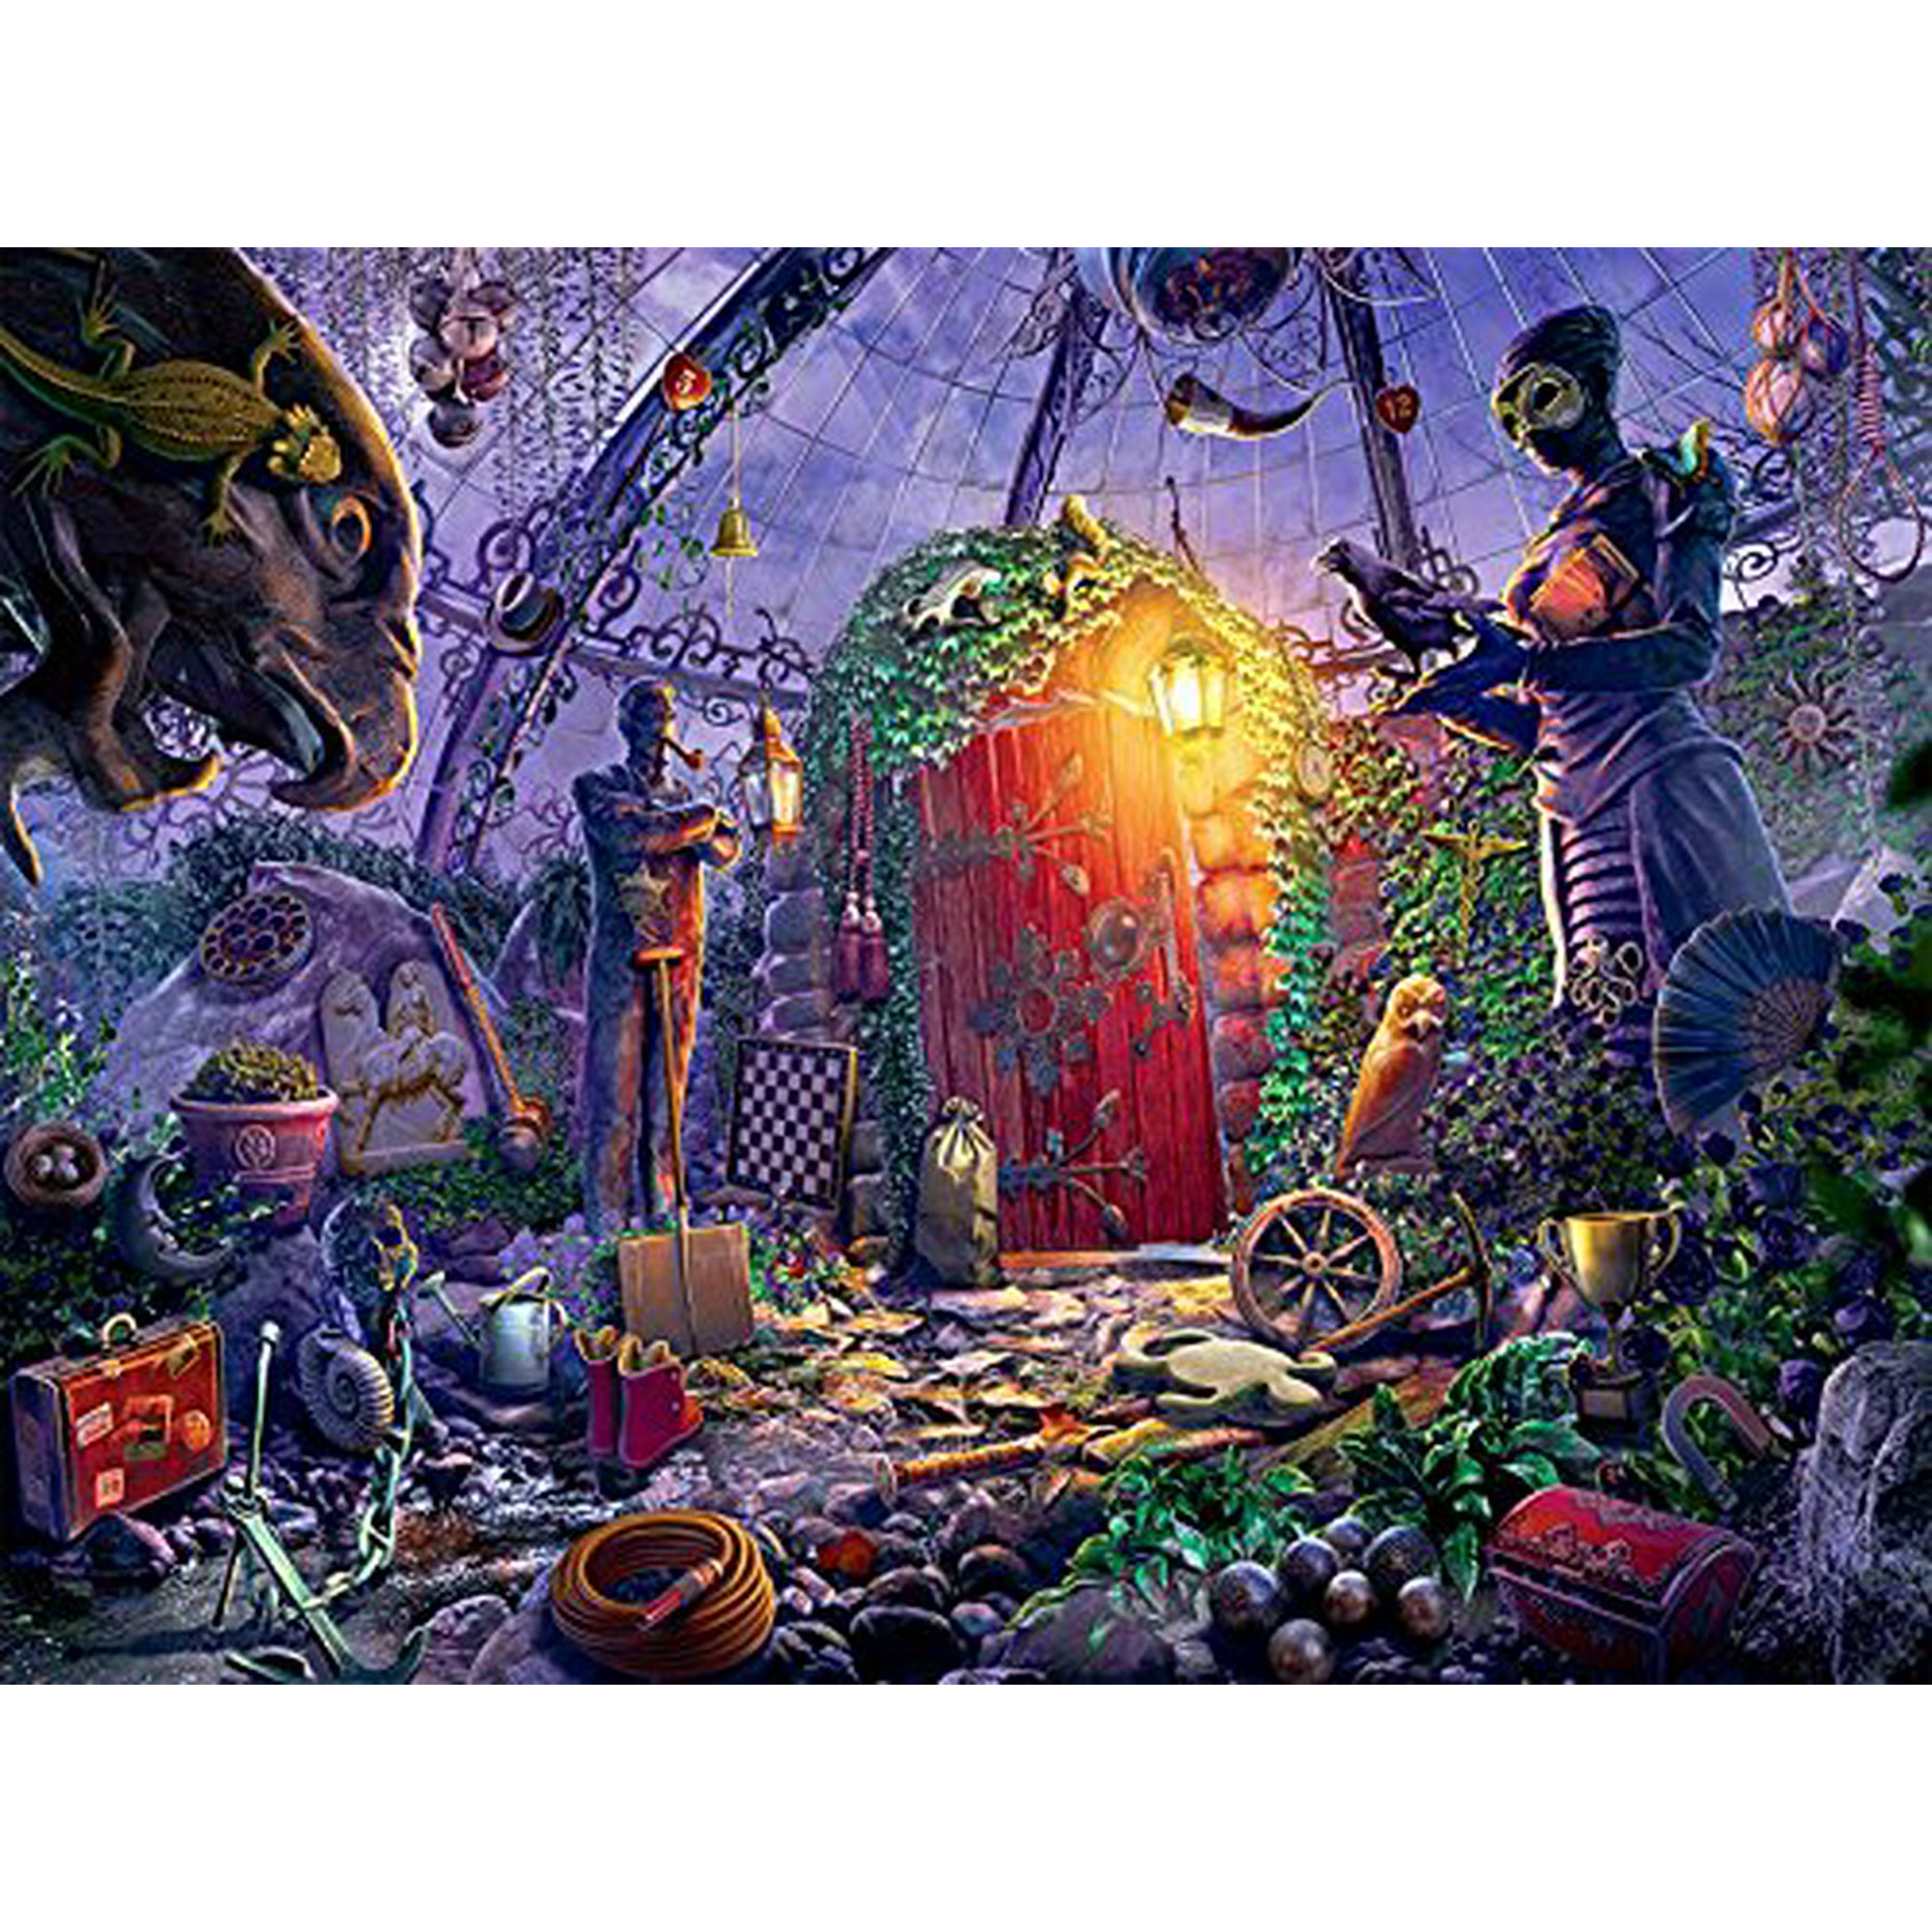 Ceaco Mystery Case Files Ravenhearst Collection Knowledge Repository Puzzle 3369-6 1000 Piece